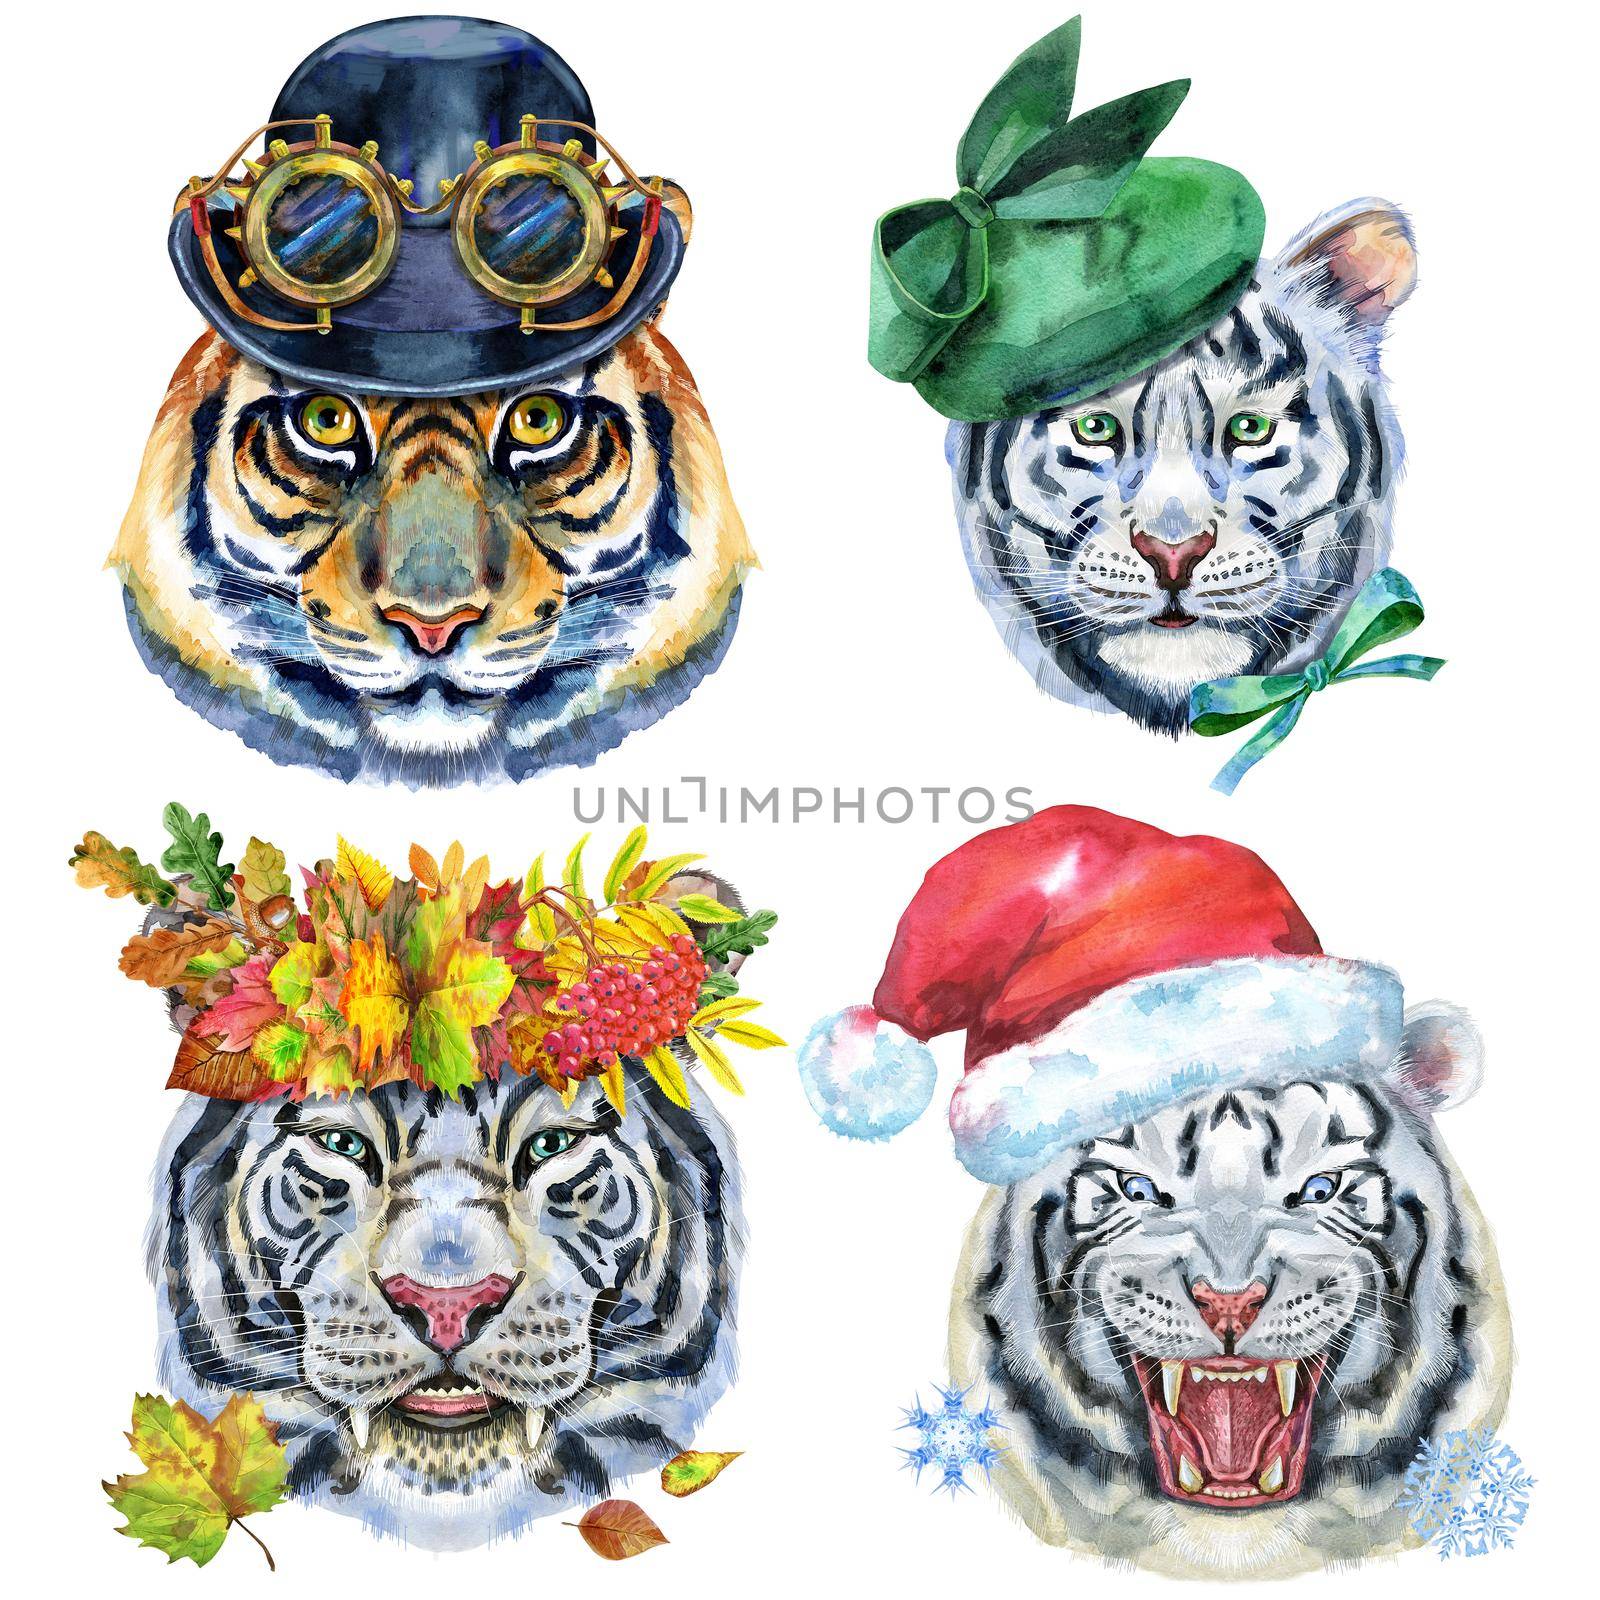 Watercolor illustration of tigers in Santa hat, in autumn wreath, green hat and bowler with googles